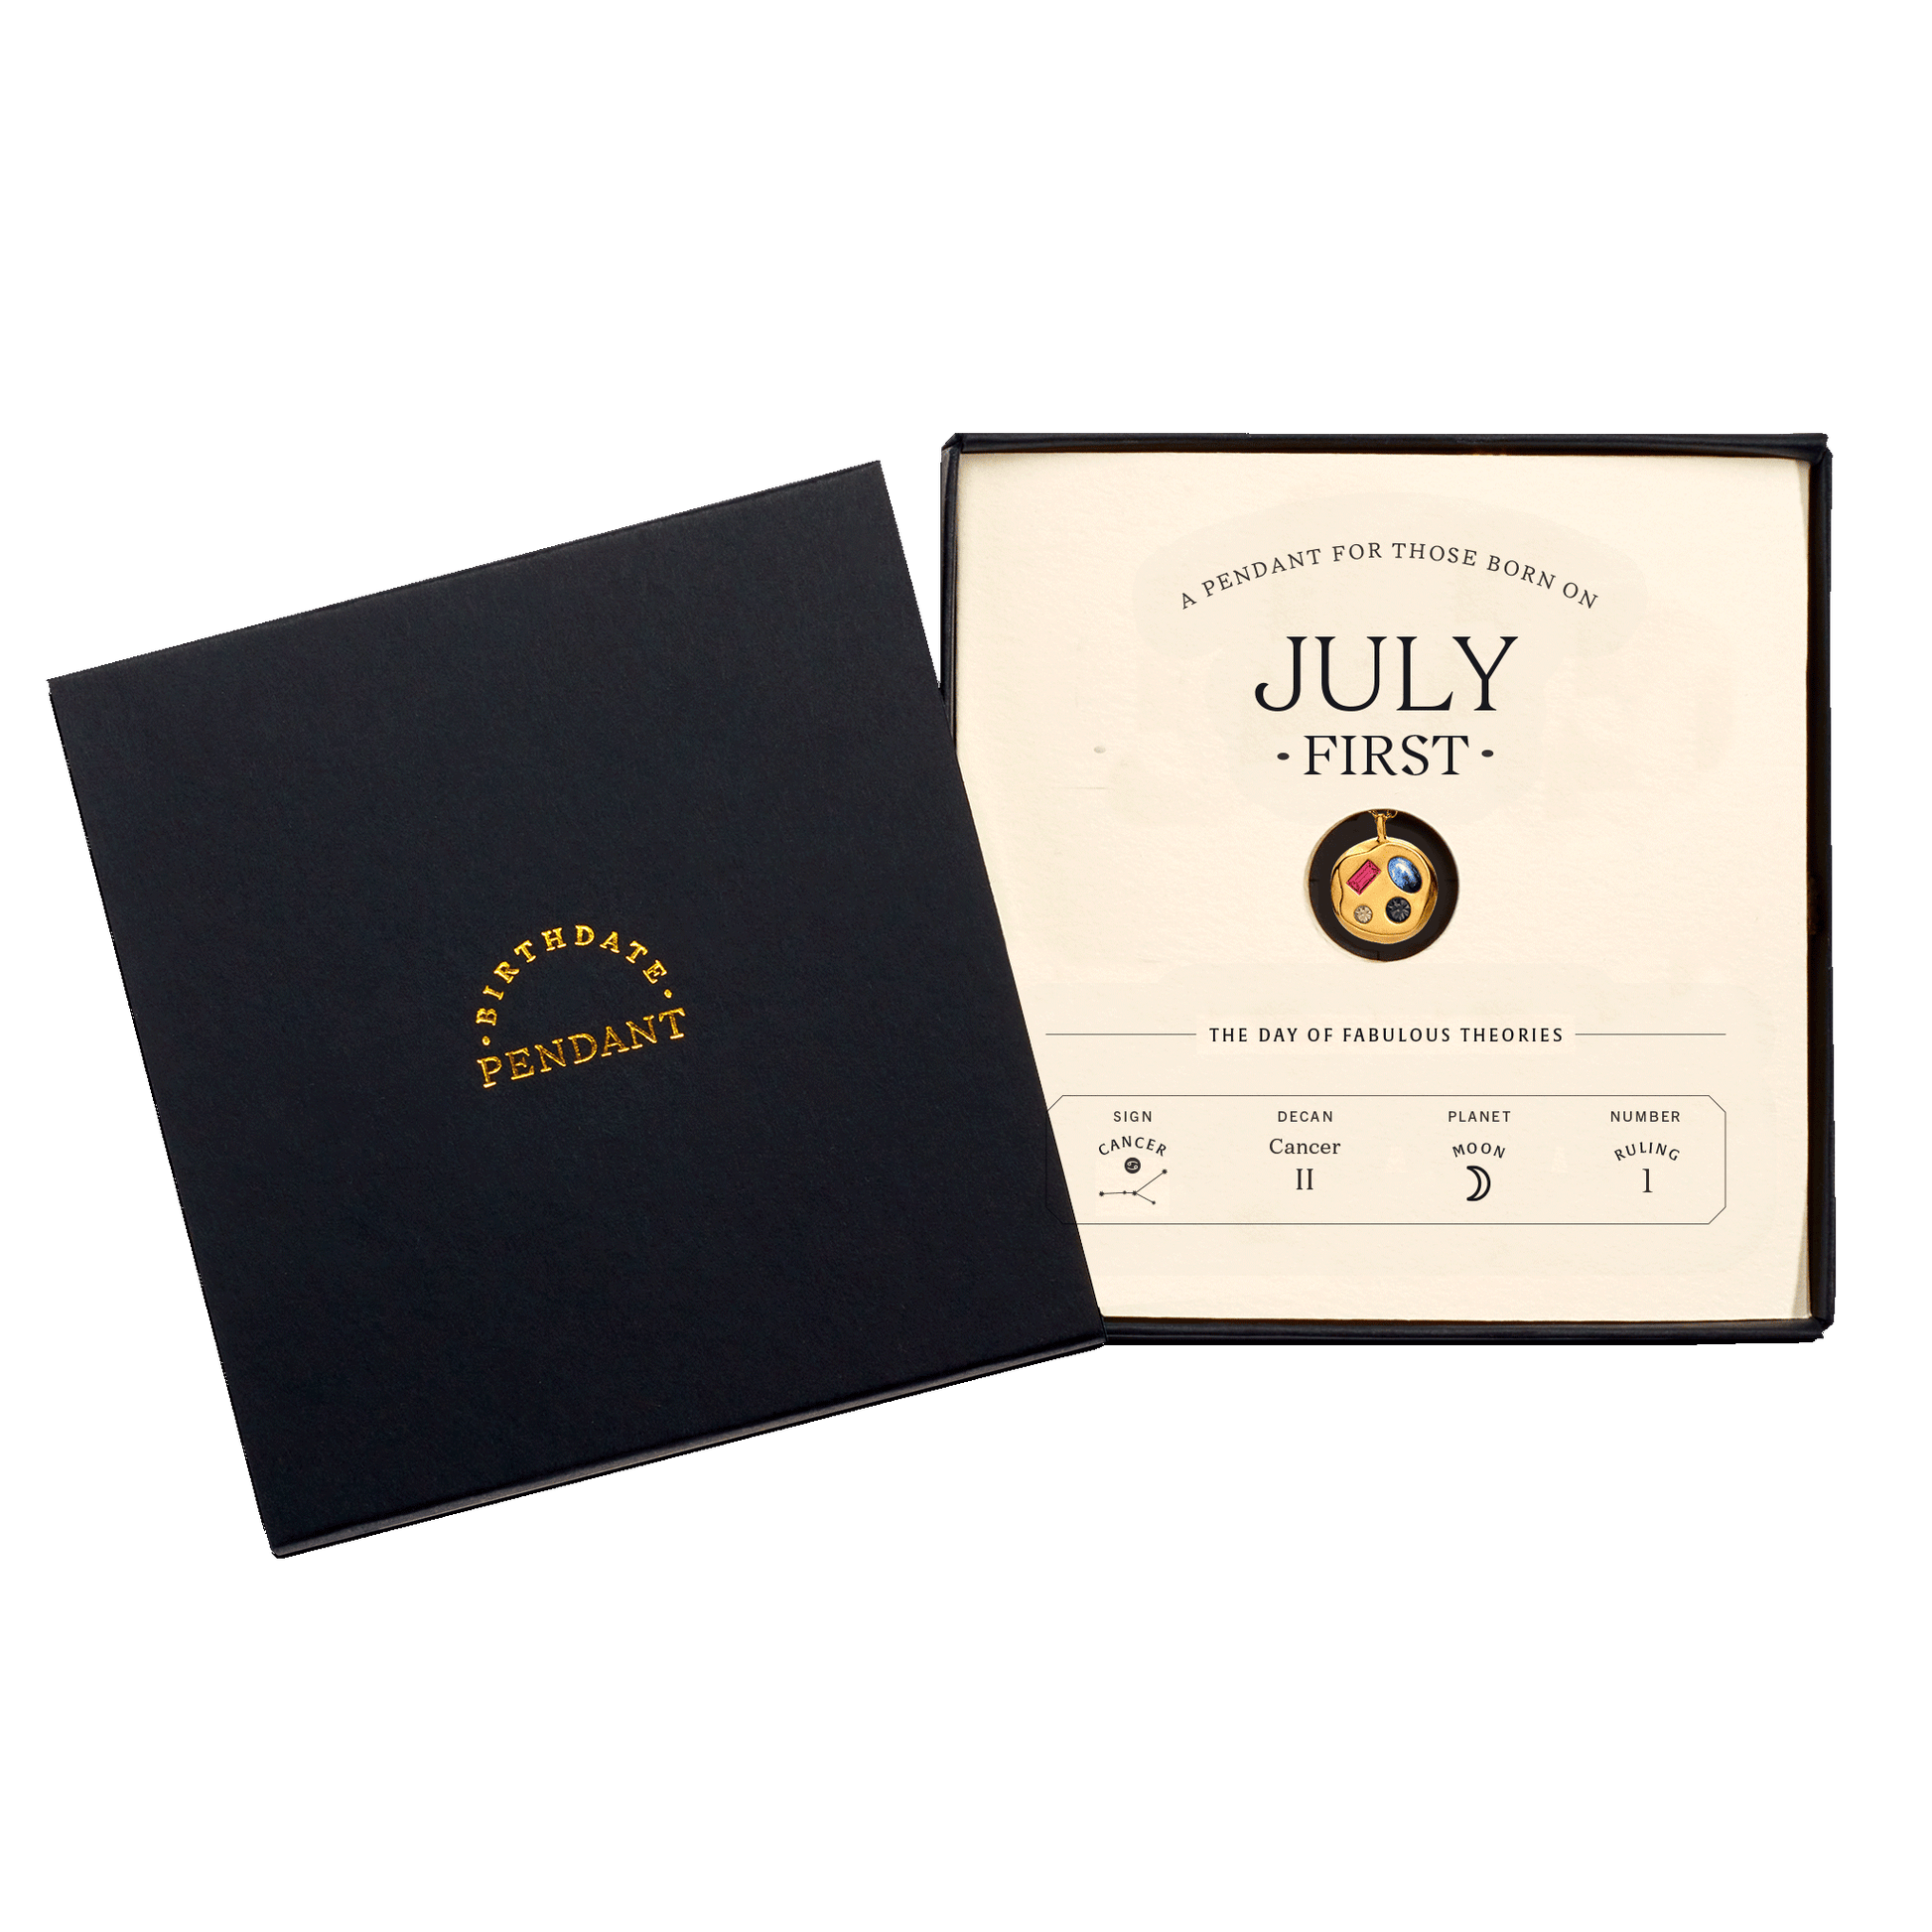 The July First Pendant inside its box